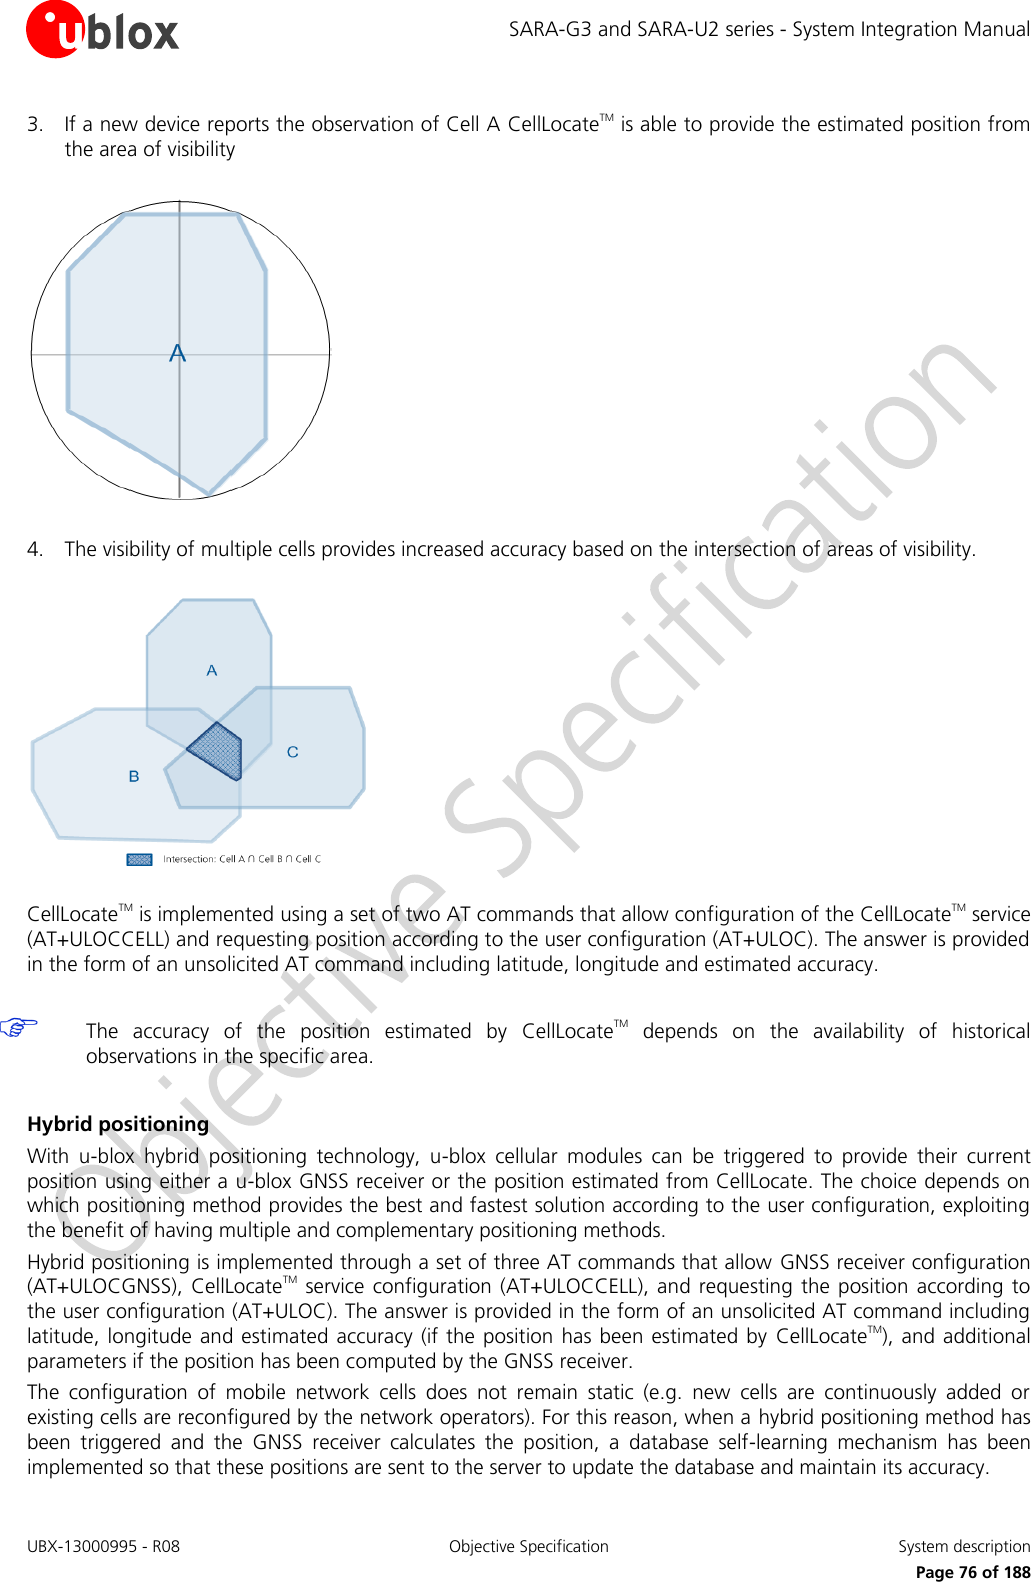 SARA-G3 and SARA-U2 series - System Integration Manual UBX-13000995 - R08  Objective Specification  System description     Page 76 of 188 3. If a new device reports the observation of Cell A CellLocateTM is able to provide the estimated position from the area of visibility    4. The visibility of multiple cells provides increased accuracy based on the intersection of areas of visibility.    CellLocateTM is implemented using a set of two AT commands that allow configuration of the CellLocateTM service (AT+ULOCCELL) and requesting position according to the user configuration (AT+ULOC). The answer is provided in the form of an unsolicited AT command including latitude, longitude and estimated accuracy.   The  accuracy  of  the  position  estimated  by  CellLocateTM  depends  on  the  availability  of  historical observations in the specific area.  Hybrid positioning With  u-blox  hybrid  positioning  technology,  u-blox  cellular  modules  can  be  triggered  to  provide  their  current position using either a u-blox GNSS receiver or the position estimated from CellLocate. The choice depends on which positioning method provides the best and fastest solution according to the user configuration, exploiting the benefit of having multiple and complementary positioning methods. Hybrid positioning is implemented through a set of three AT commands that allow GNSS receiver configuration (AT+ULOCGNSS), CellLocateTM  service  configuration (AT+ULOCCELL),  and requesting  the position according to the user configuration (AT+ULOC). The answer is provided in the form of an unsolicited AT command including latitude, longitude  and estimated accuracy (if the  position has been  estimated by  CellLocateTM), and  additional parameters if the position has been computed by the GNSS receiver. The  configuration  of  mobile  network  cells  does  not  remain  static  (e.g.  new  cells  are  continuously  added  or existing cells are reconfigured by the network operators). For this reason, when a hybrid positioning method has been  triggered  and  the  GNSS  receiver  calculates  the  position,  a  database  self-learning  mechanism  has  been implemented so that these positions are sent to the server to update the database and maintain its accuracy. 